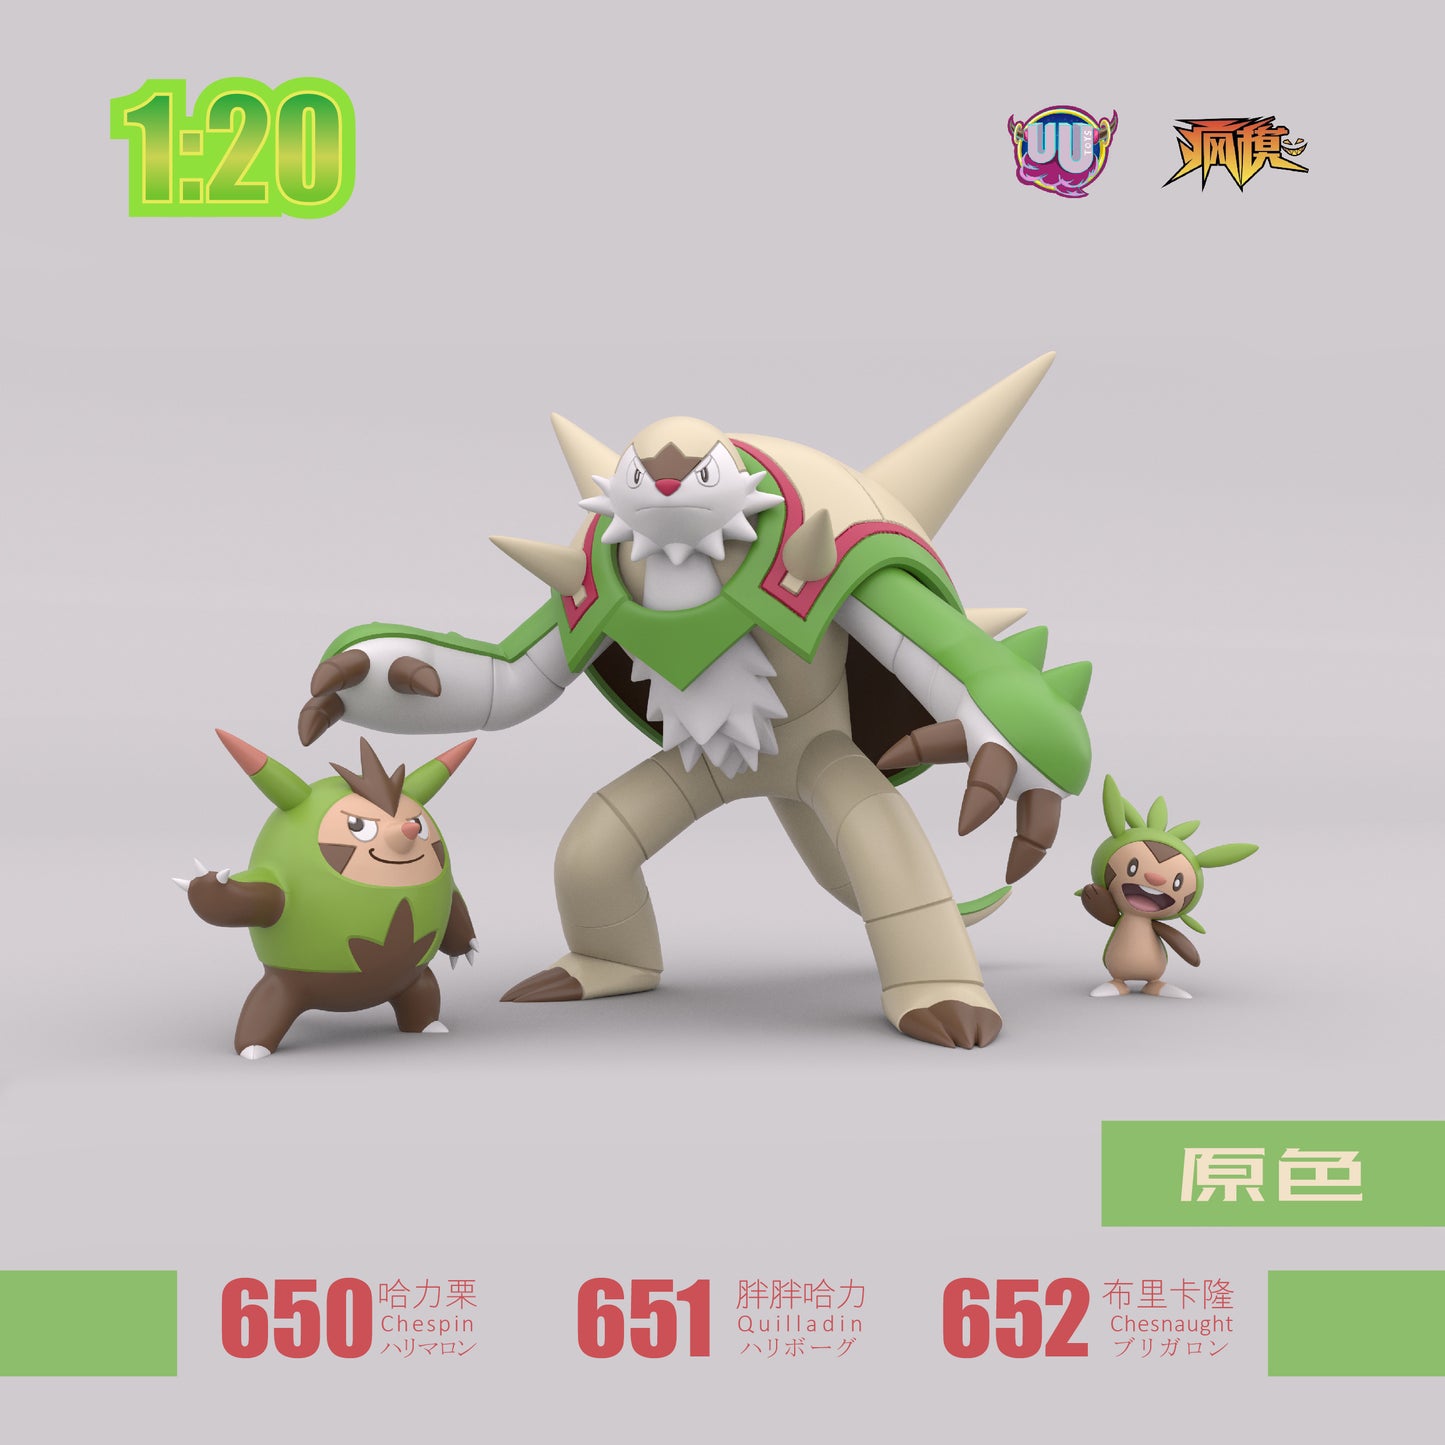 [PREORDER CLOSED] 1/20 Scale World Figure [UU] - Chespin & Quilladin & Chesnaught